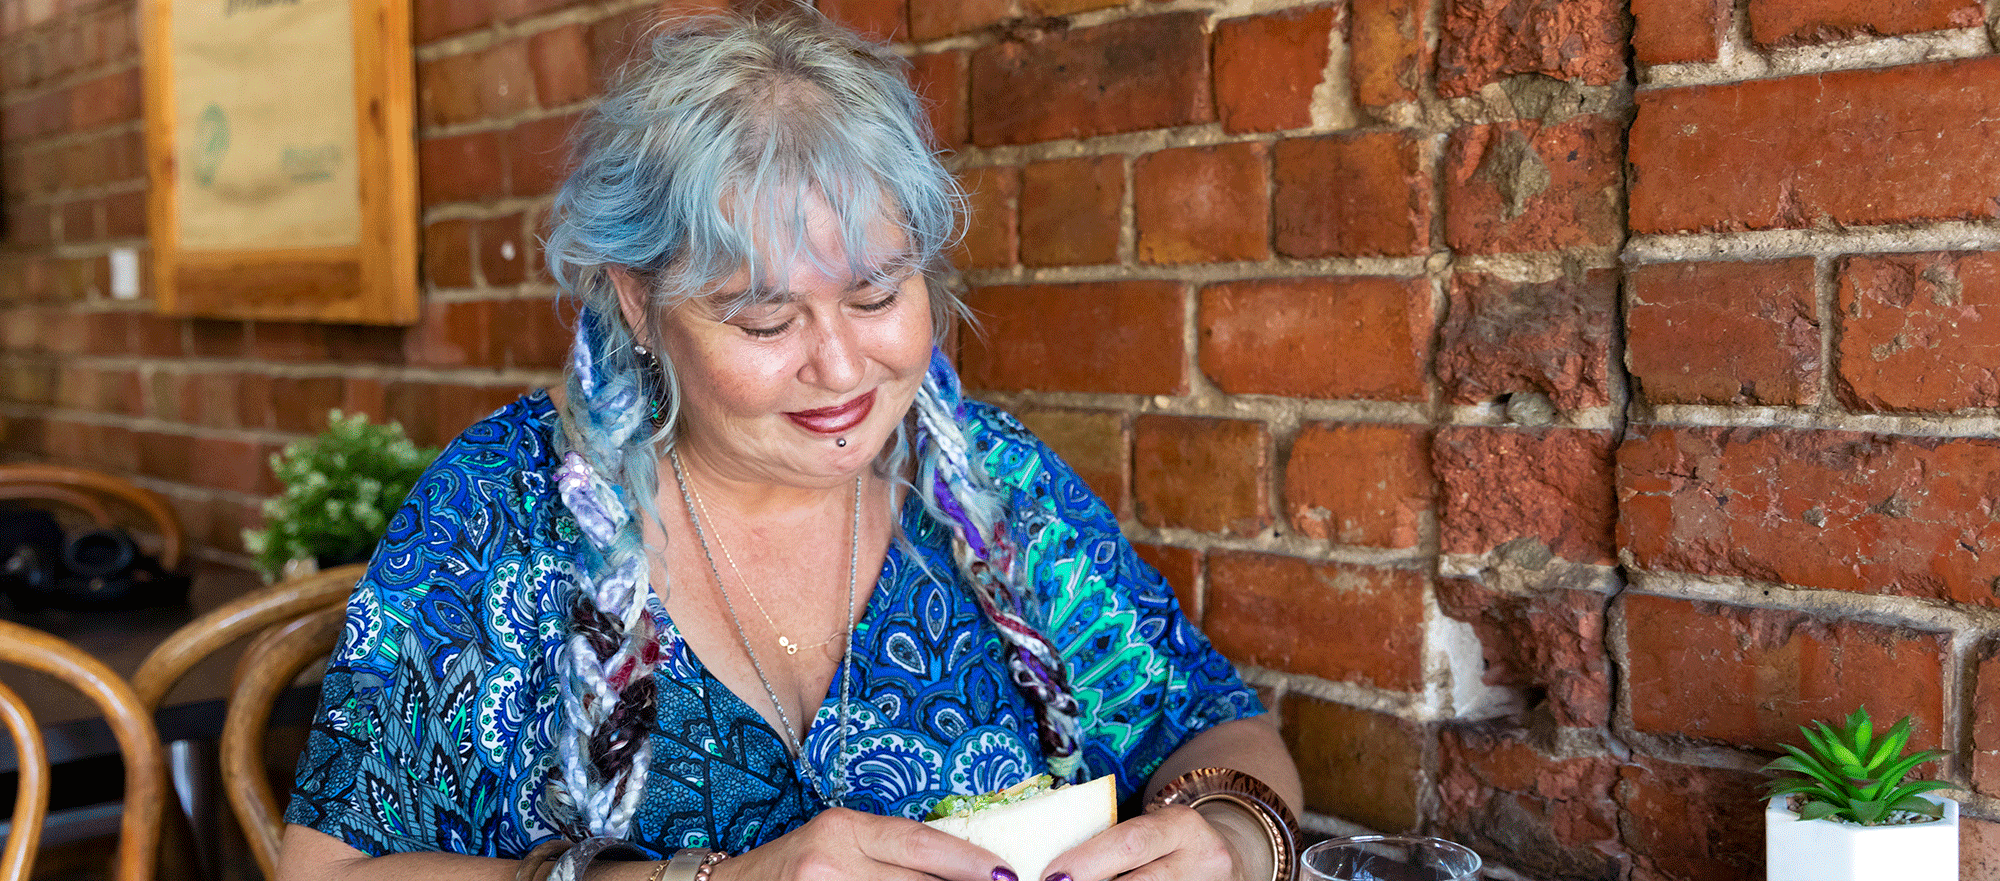 A woman in a cafe with exposed brick walls eating a sandwhich